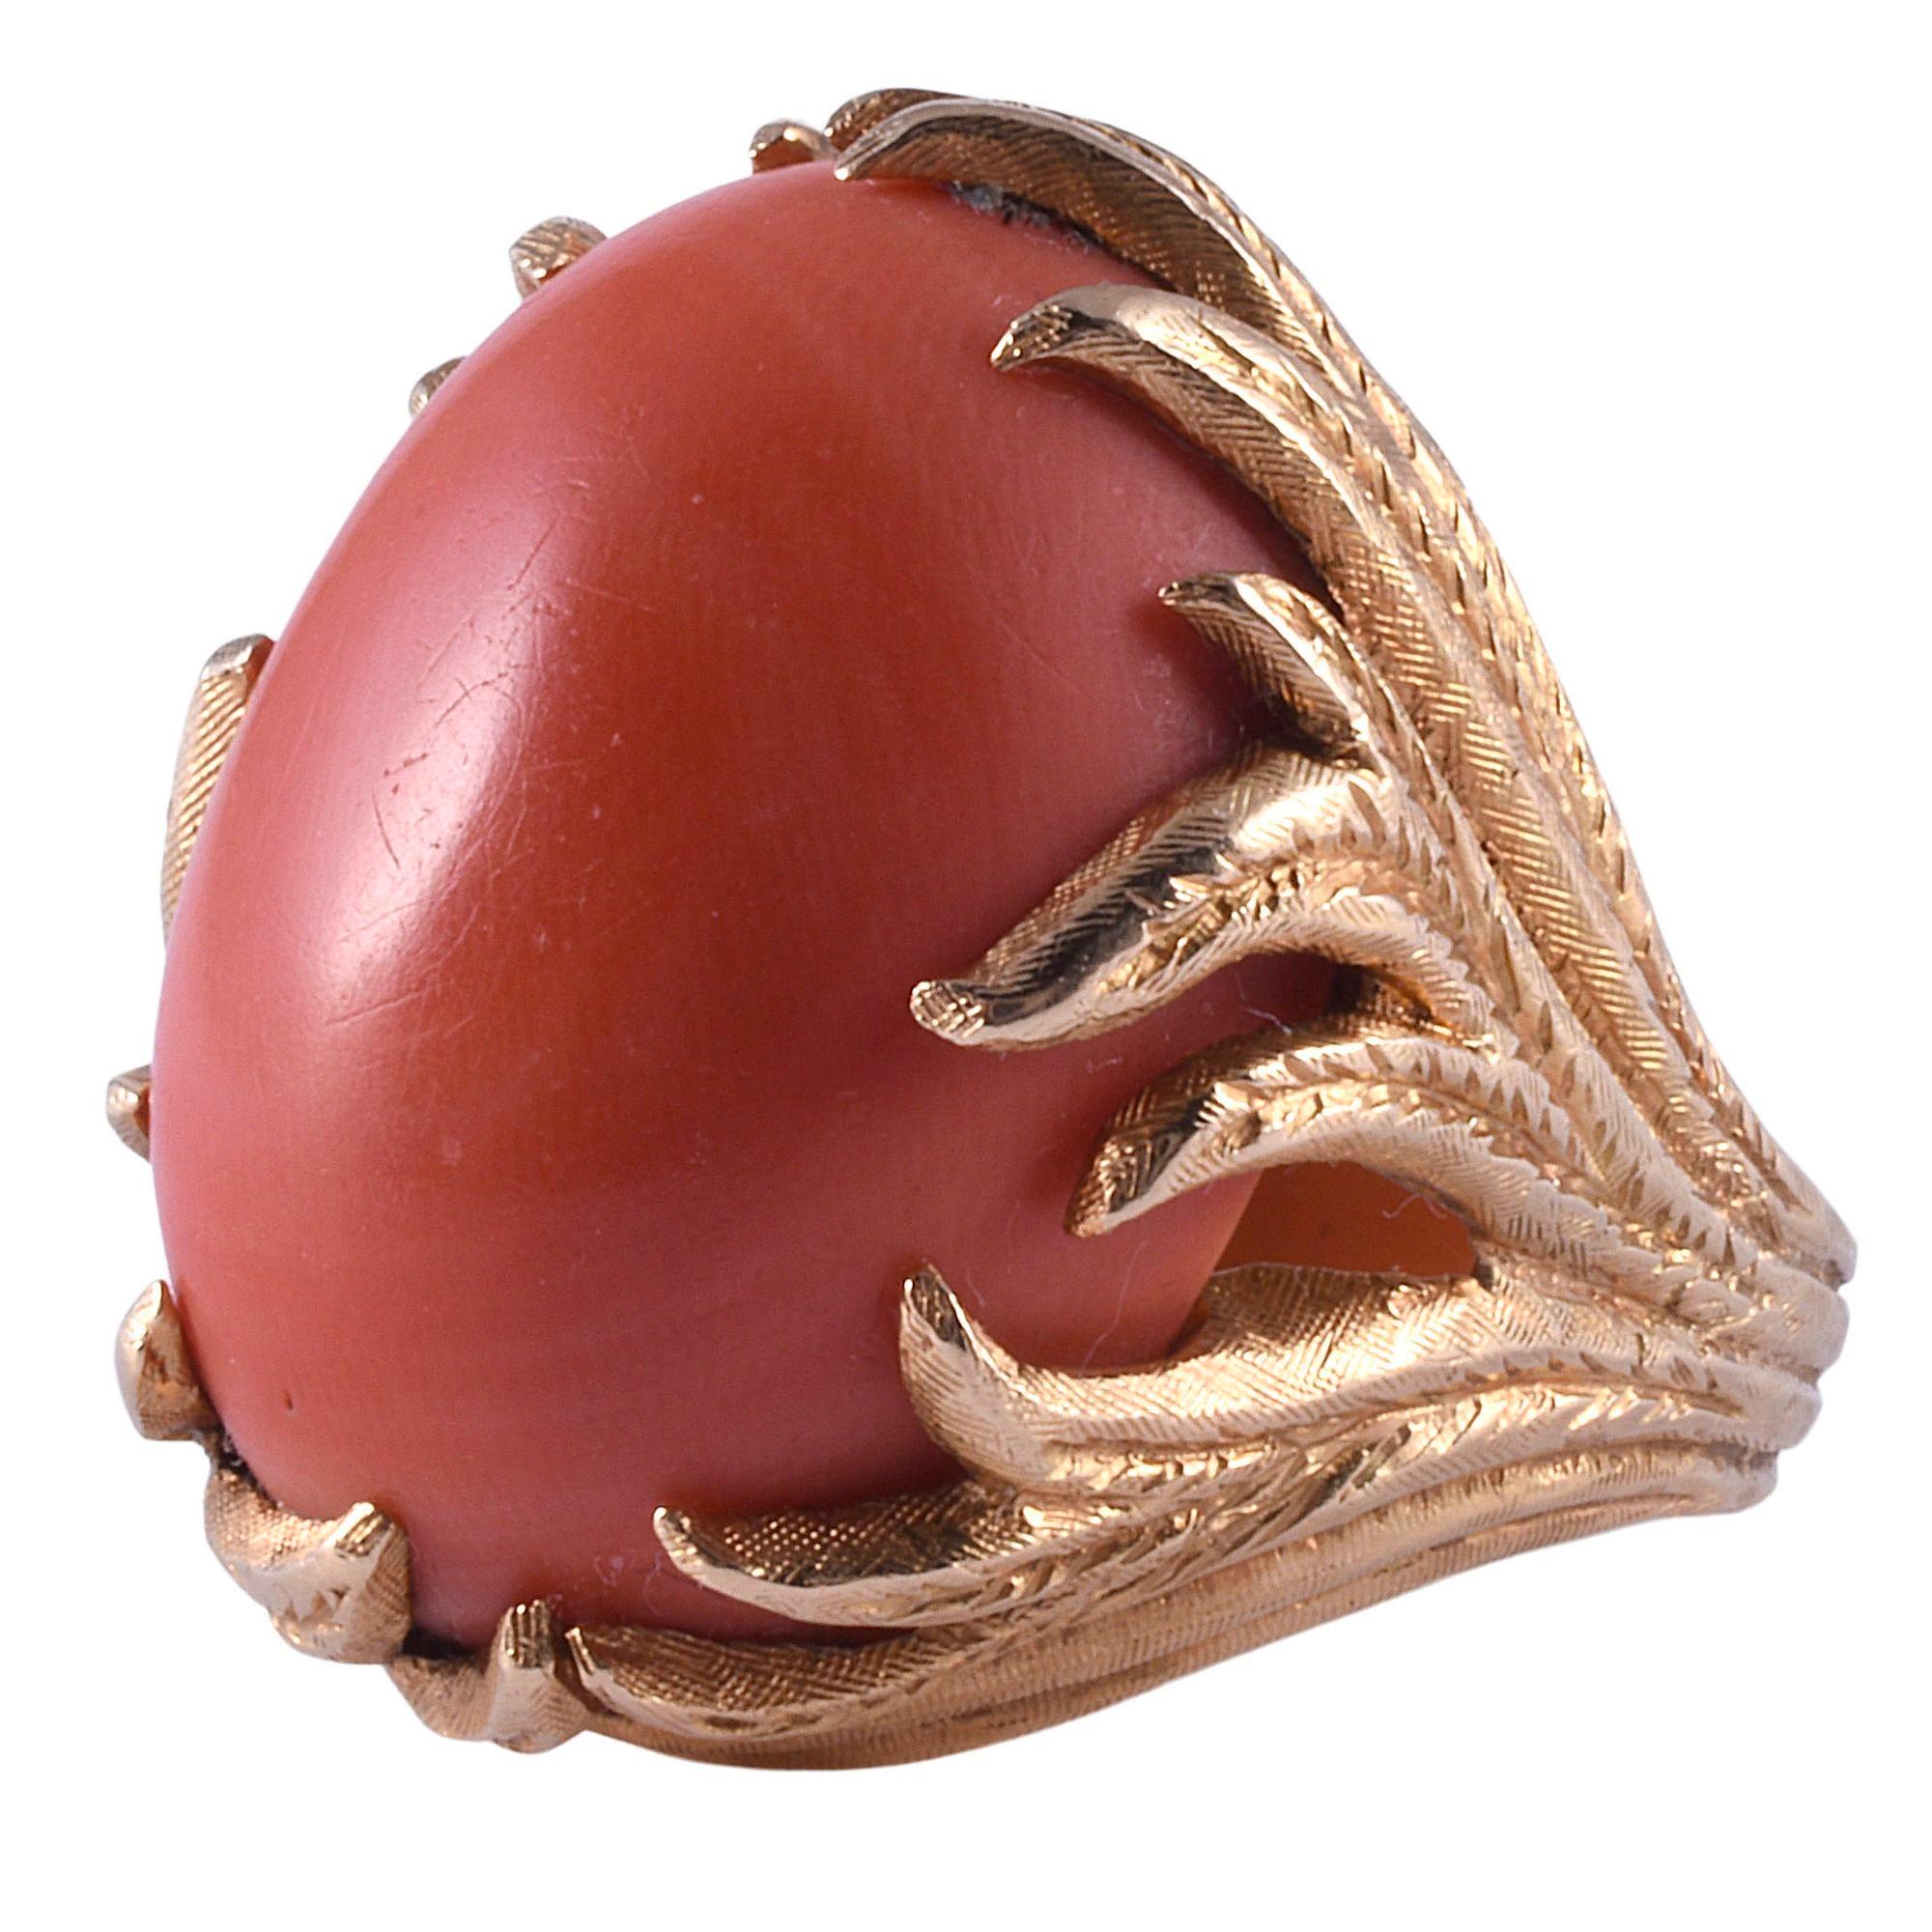 Vintage oval coral ring in hand engraved setting, circa 1970. This vintage ring is crafted in 14 karat yellow gold with hand engraving. It features a large oval coral measuring 24mm H x 18mm W x 11.1mm D. This ring is a size 7.75. [KIMH 617]